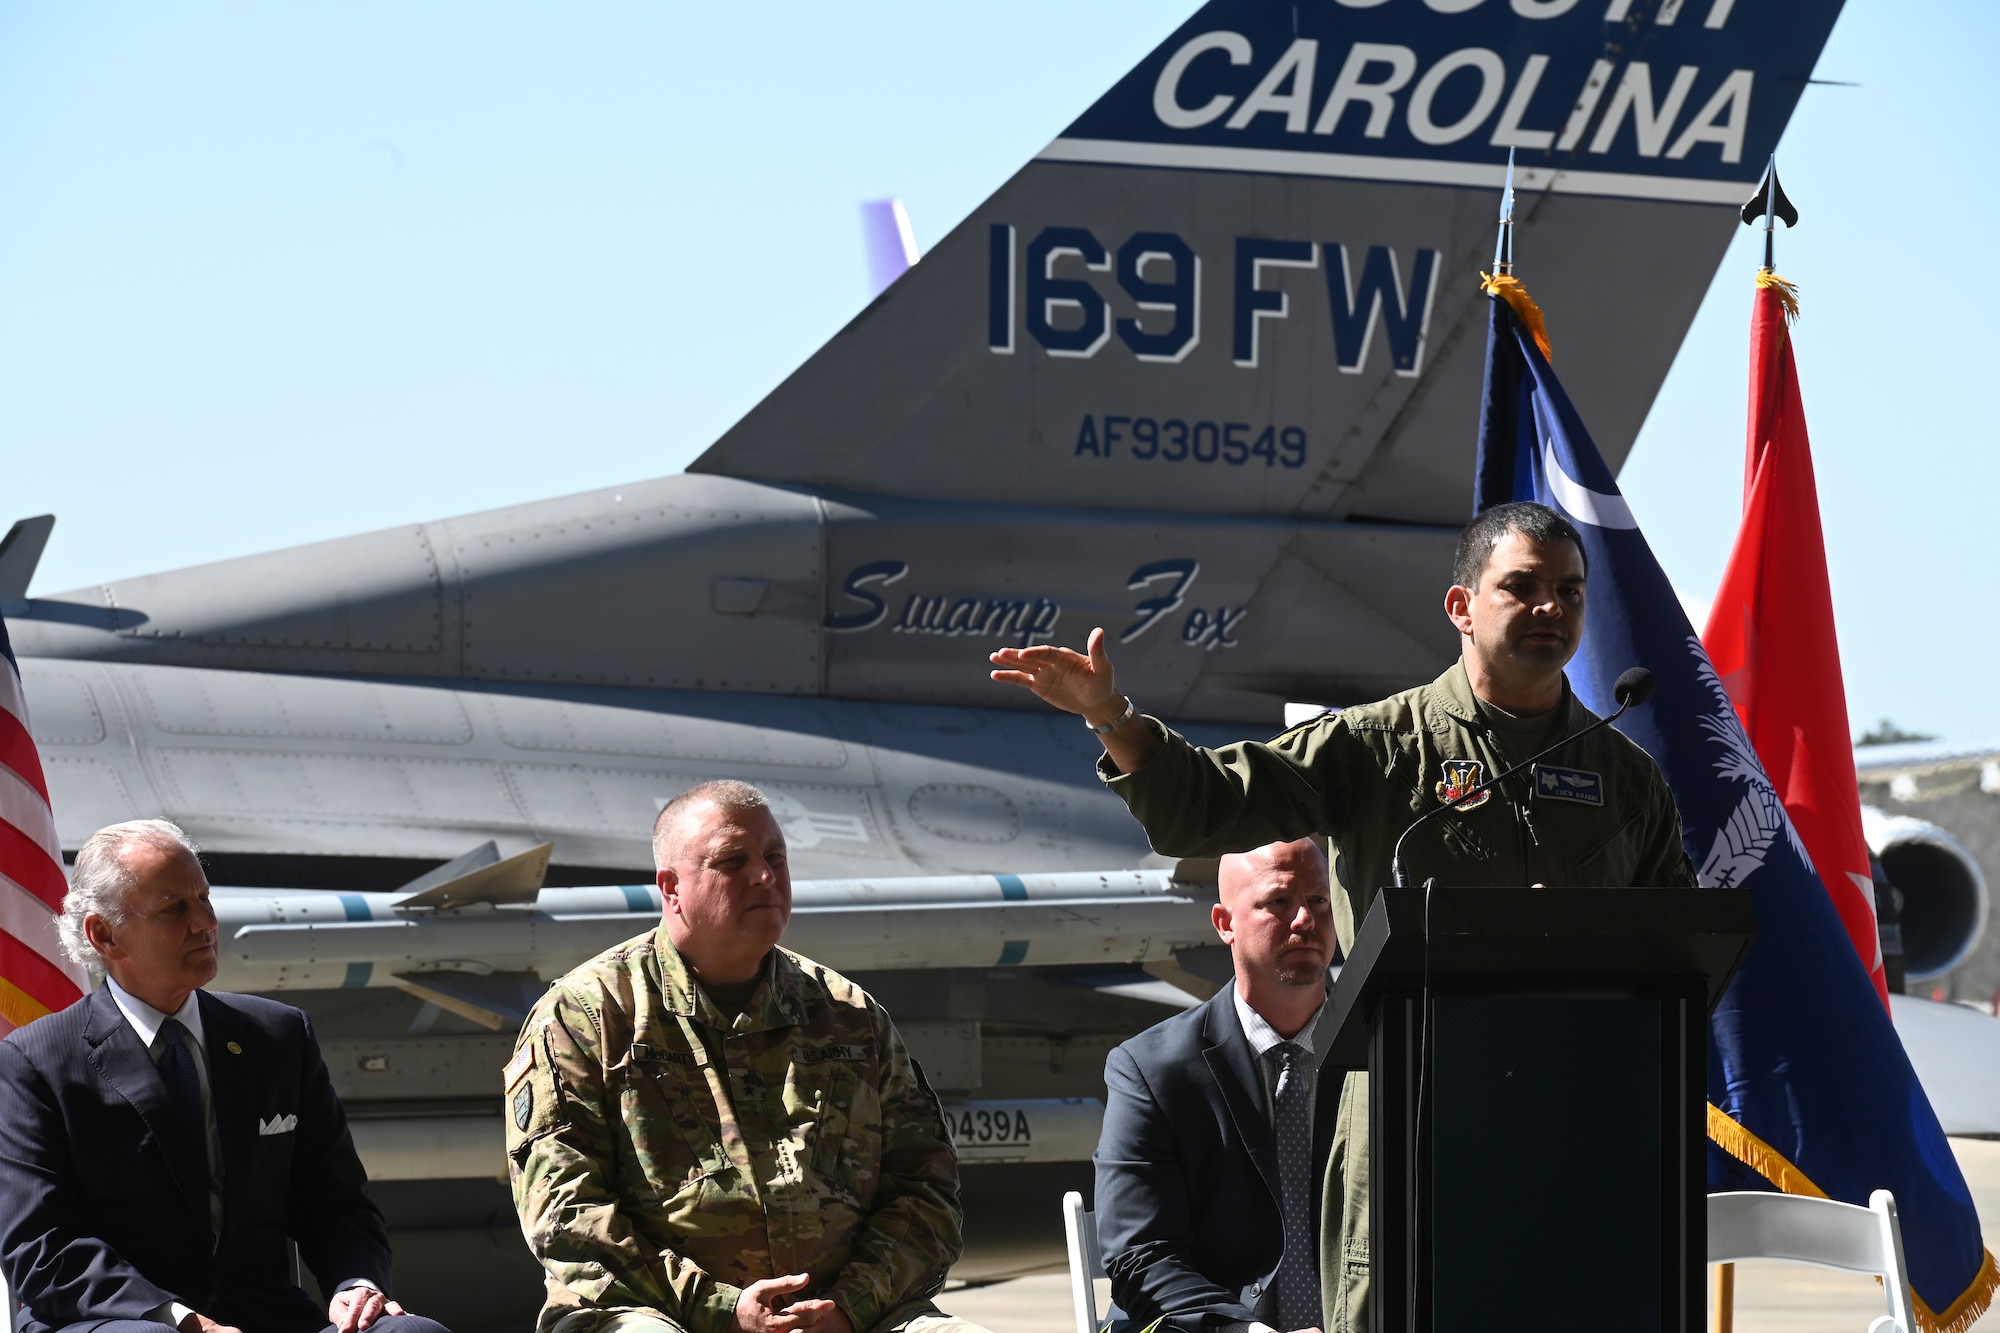 U.S. Air Force Col. Quaid Quadri, 169th Fighter Wing commander, speaks to local media and distinguished visitors at the Columbia Metropolitan Airport West Cargo Hangar, Columbia, South Carolina during a press conference, March 21, 2022. Columbia Metropolitan Airport hosts a press conference to announce a six-month temporary move of F-16 fighter jet flying operations from the the South Carolina Air National Guard's 169th Fighter Wing at nearby McEntire Joint National Guard Base to their airport. This joint partnership, regarding the temporary relocation of F-16 aircraft, will begin in April 2022. Speaking during the press conference are South Carolina Governor Henry McMaster; U.S. Army Maj. Gen. Van McCarty, The Adjutant General of South Carolina; U.S. Air Force Col. Quaid Quadri, 169th Fighter Wing Commander; and Mike Gula Executive Director at Columbia Metropolitan Airport.  (U.S. Air National Guard photo by Senior Master Sgt. Edward Snyder, 169th Fighter Wing)